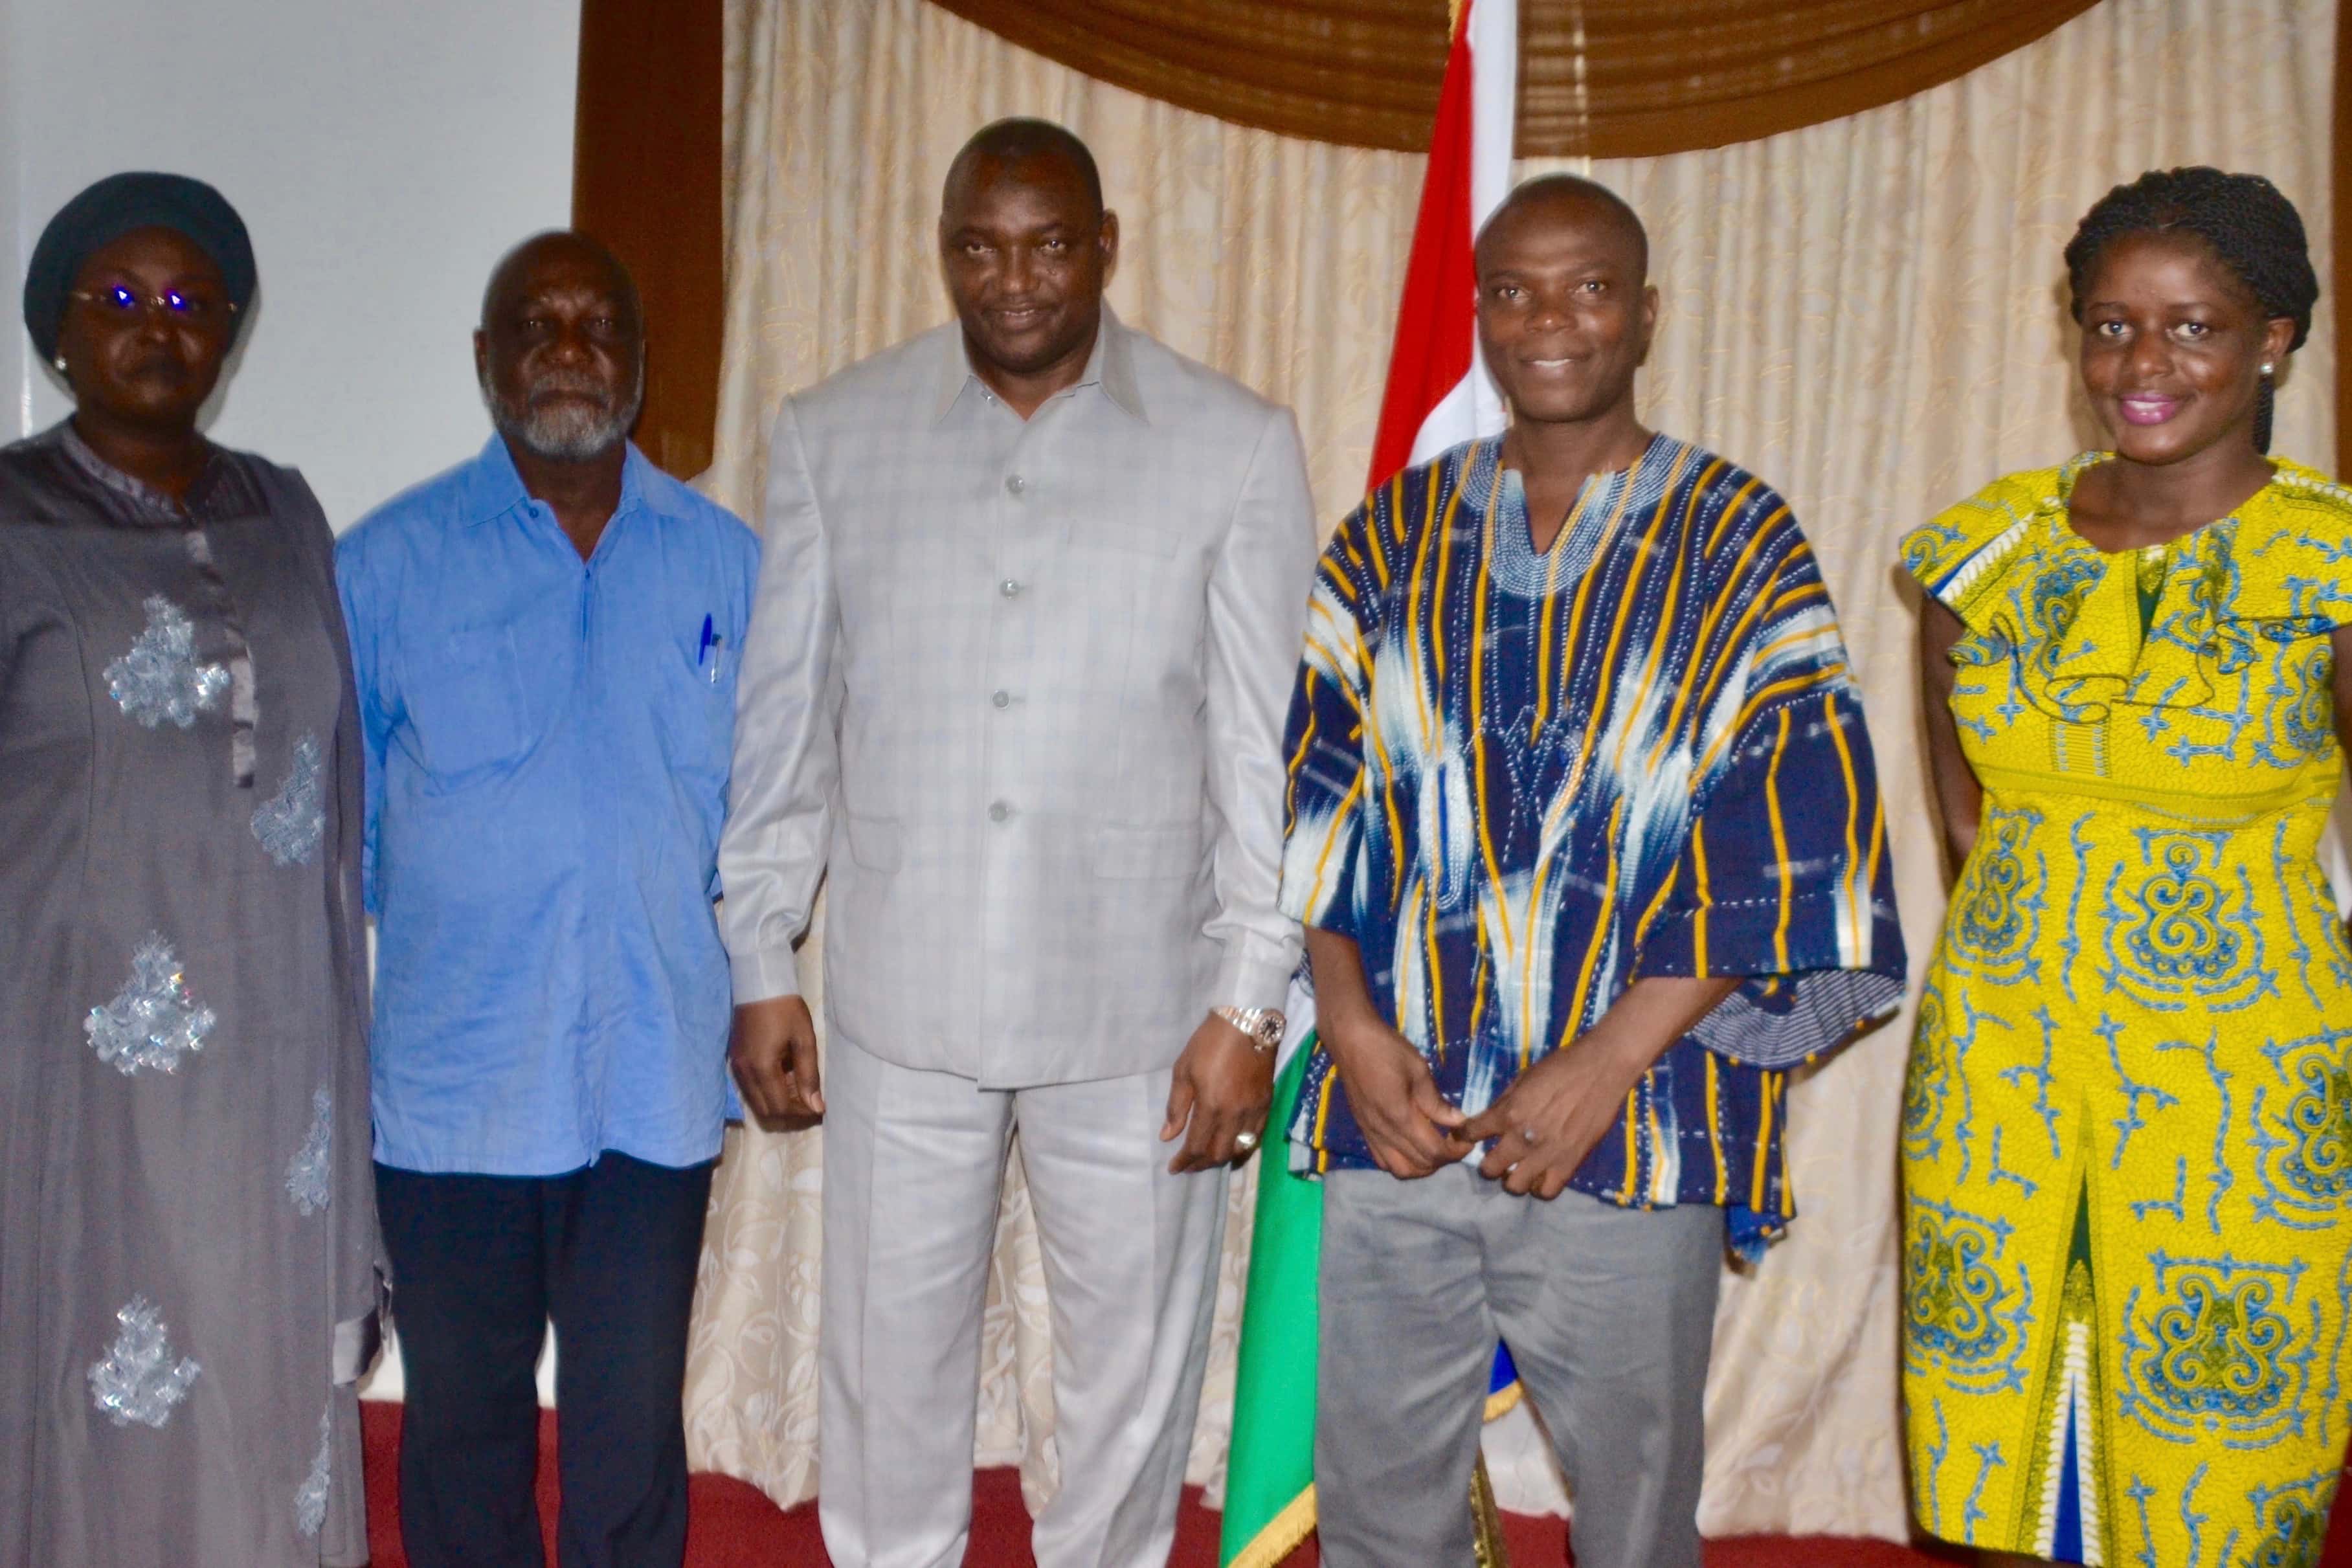 The MFWA delegation in a group photograph with President Adama Barrow, MFWA